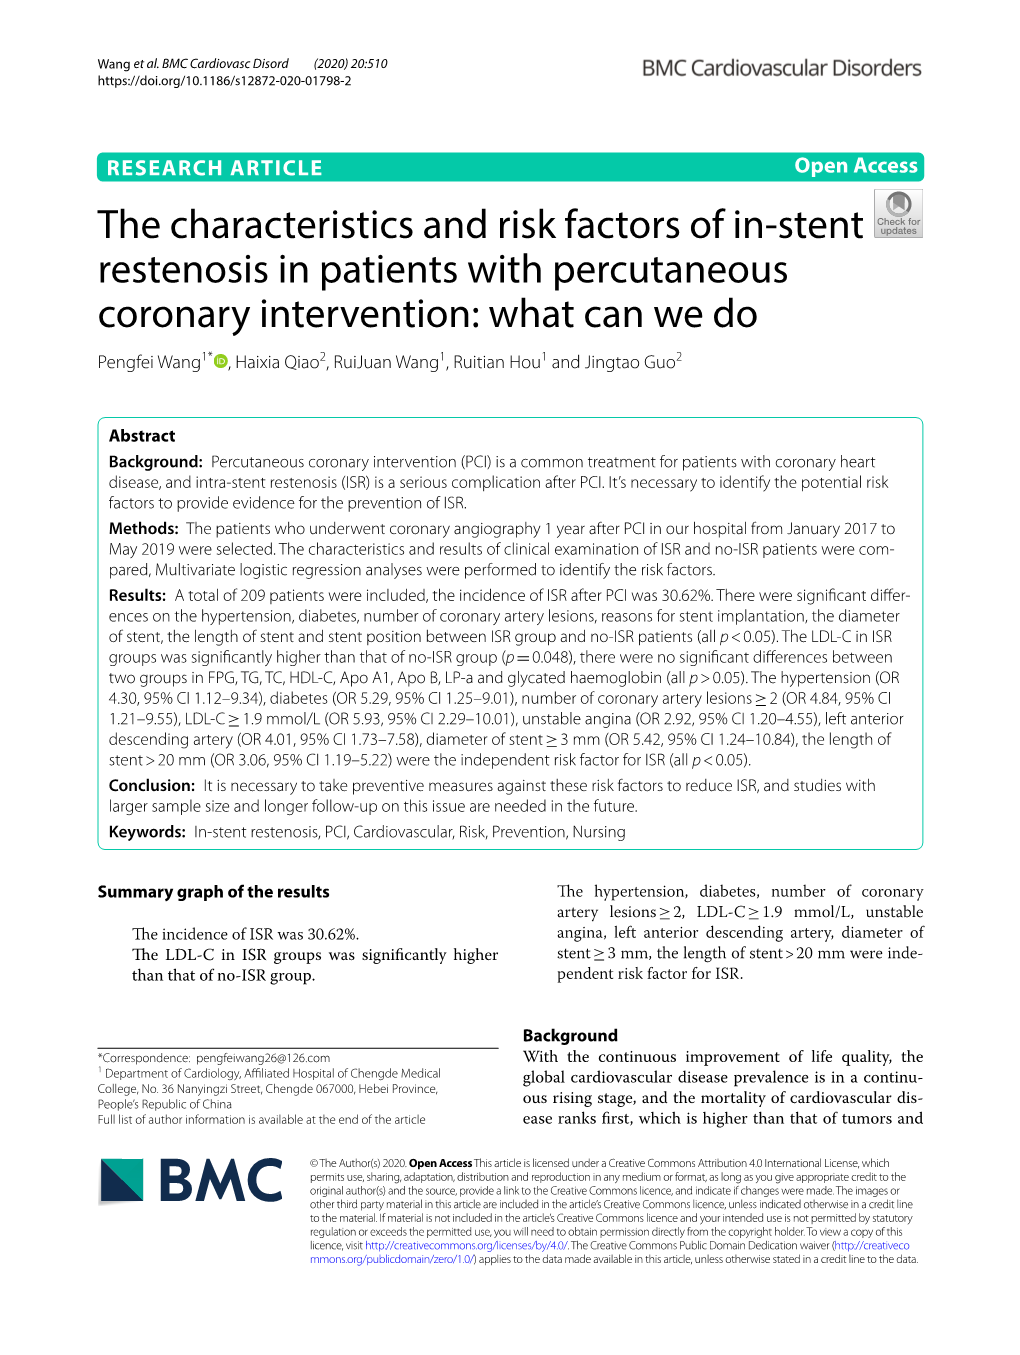 The Characteristics and Risk Factors of In-Stent Restenosis in Patients With